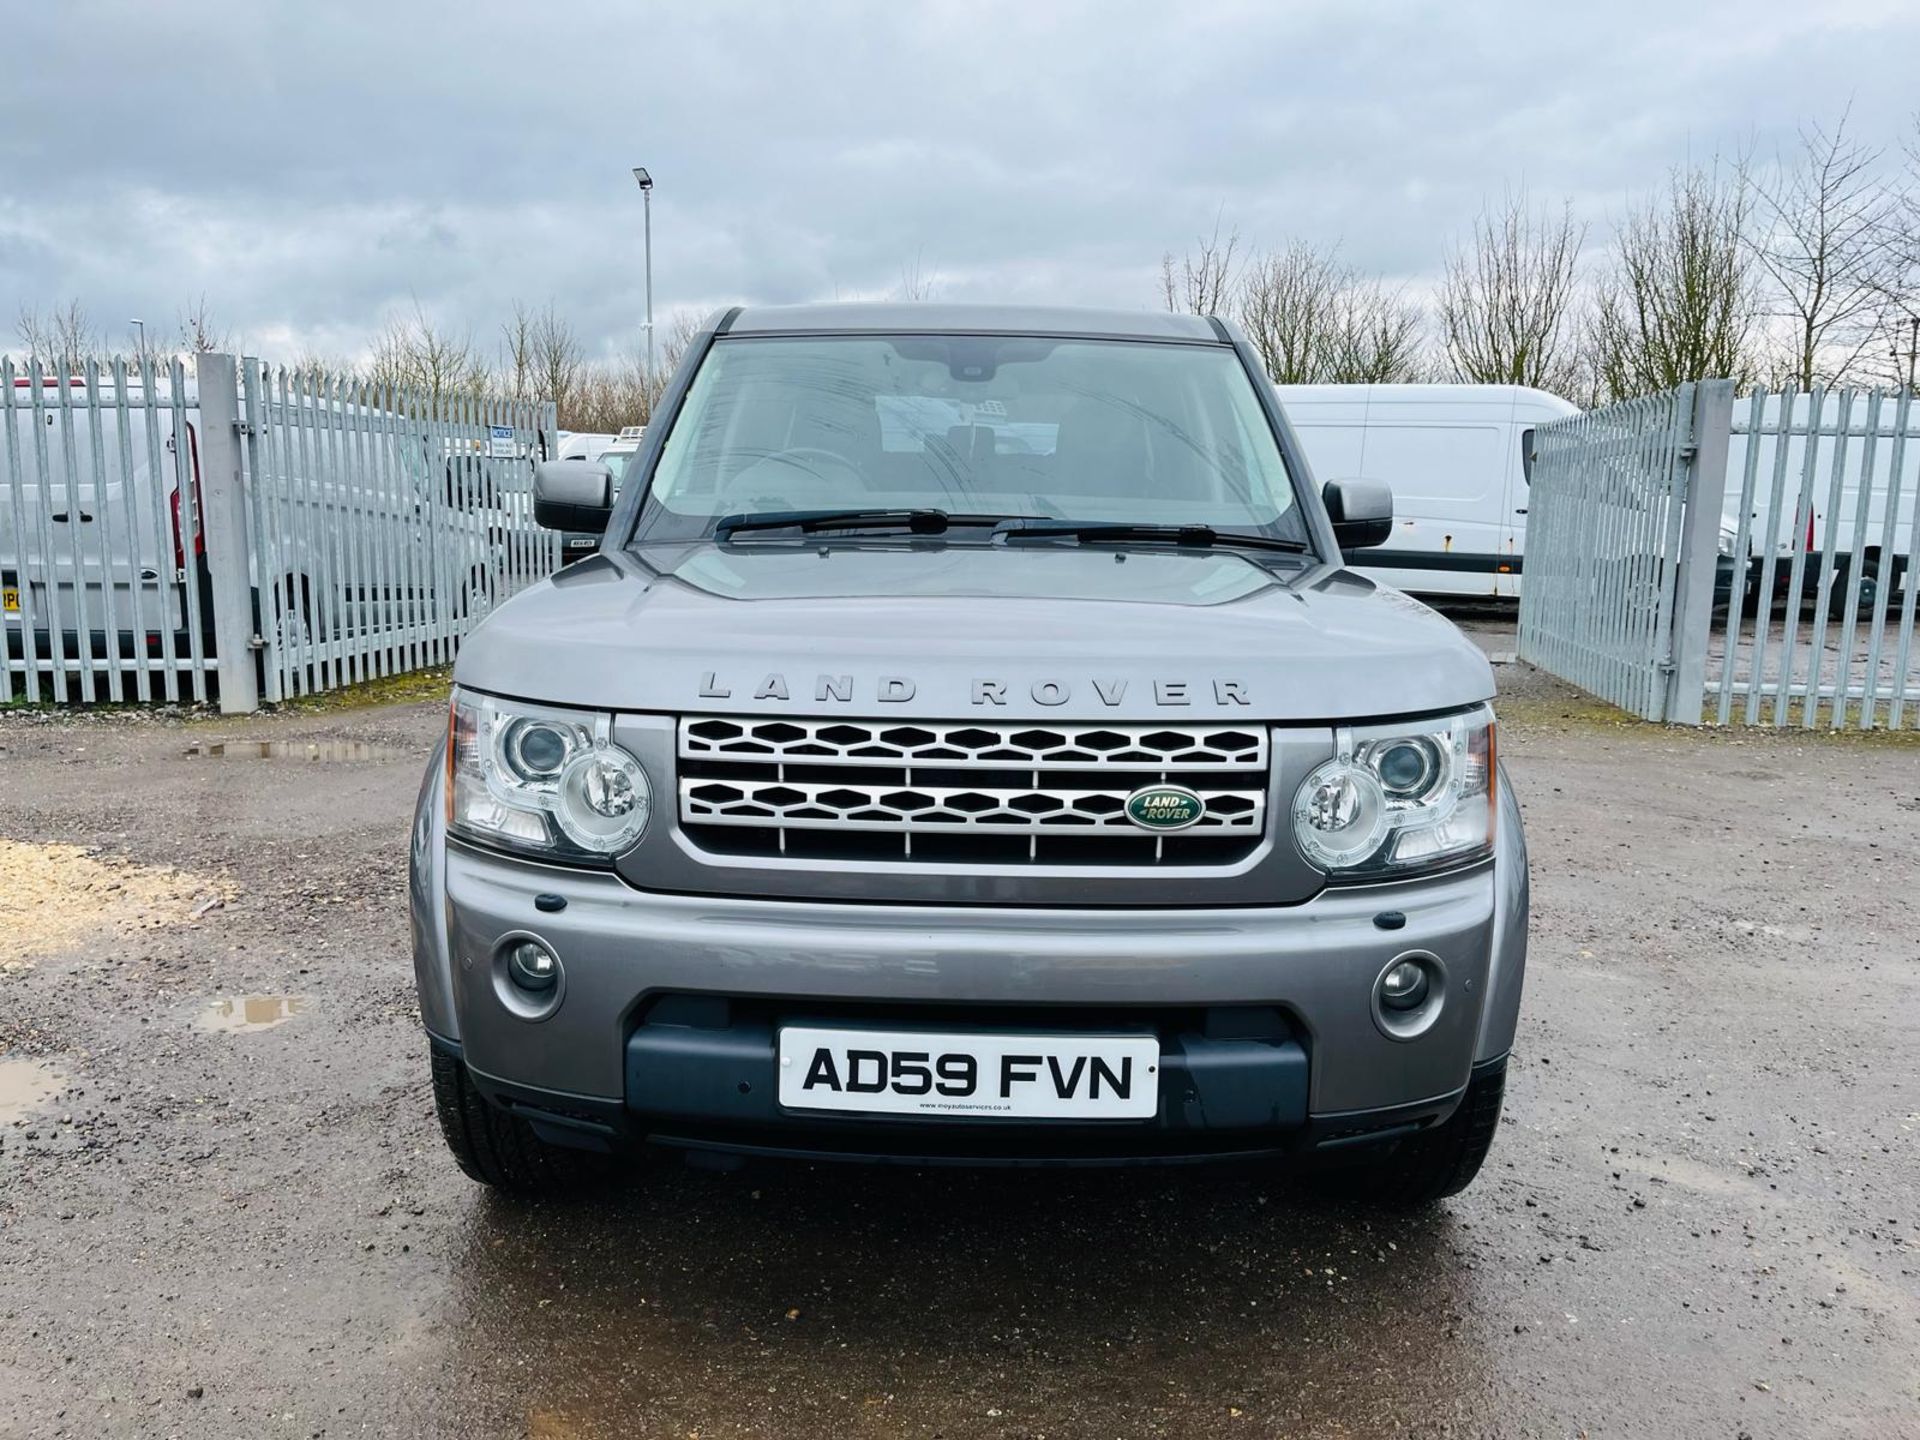 ** ON SALE ** Land Rover Discovery 4 3.0 TDV6 HSE 4WD 2009 '59 Reg' Full Spec - No Vat - 7 Seats - Image 2 of 39